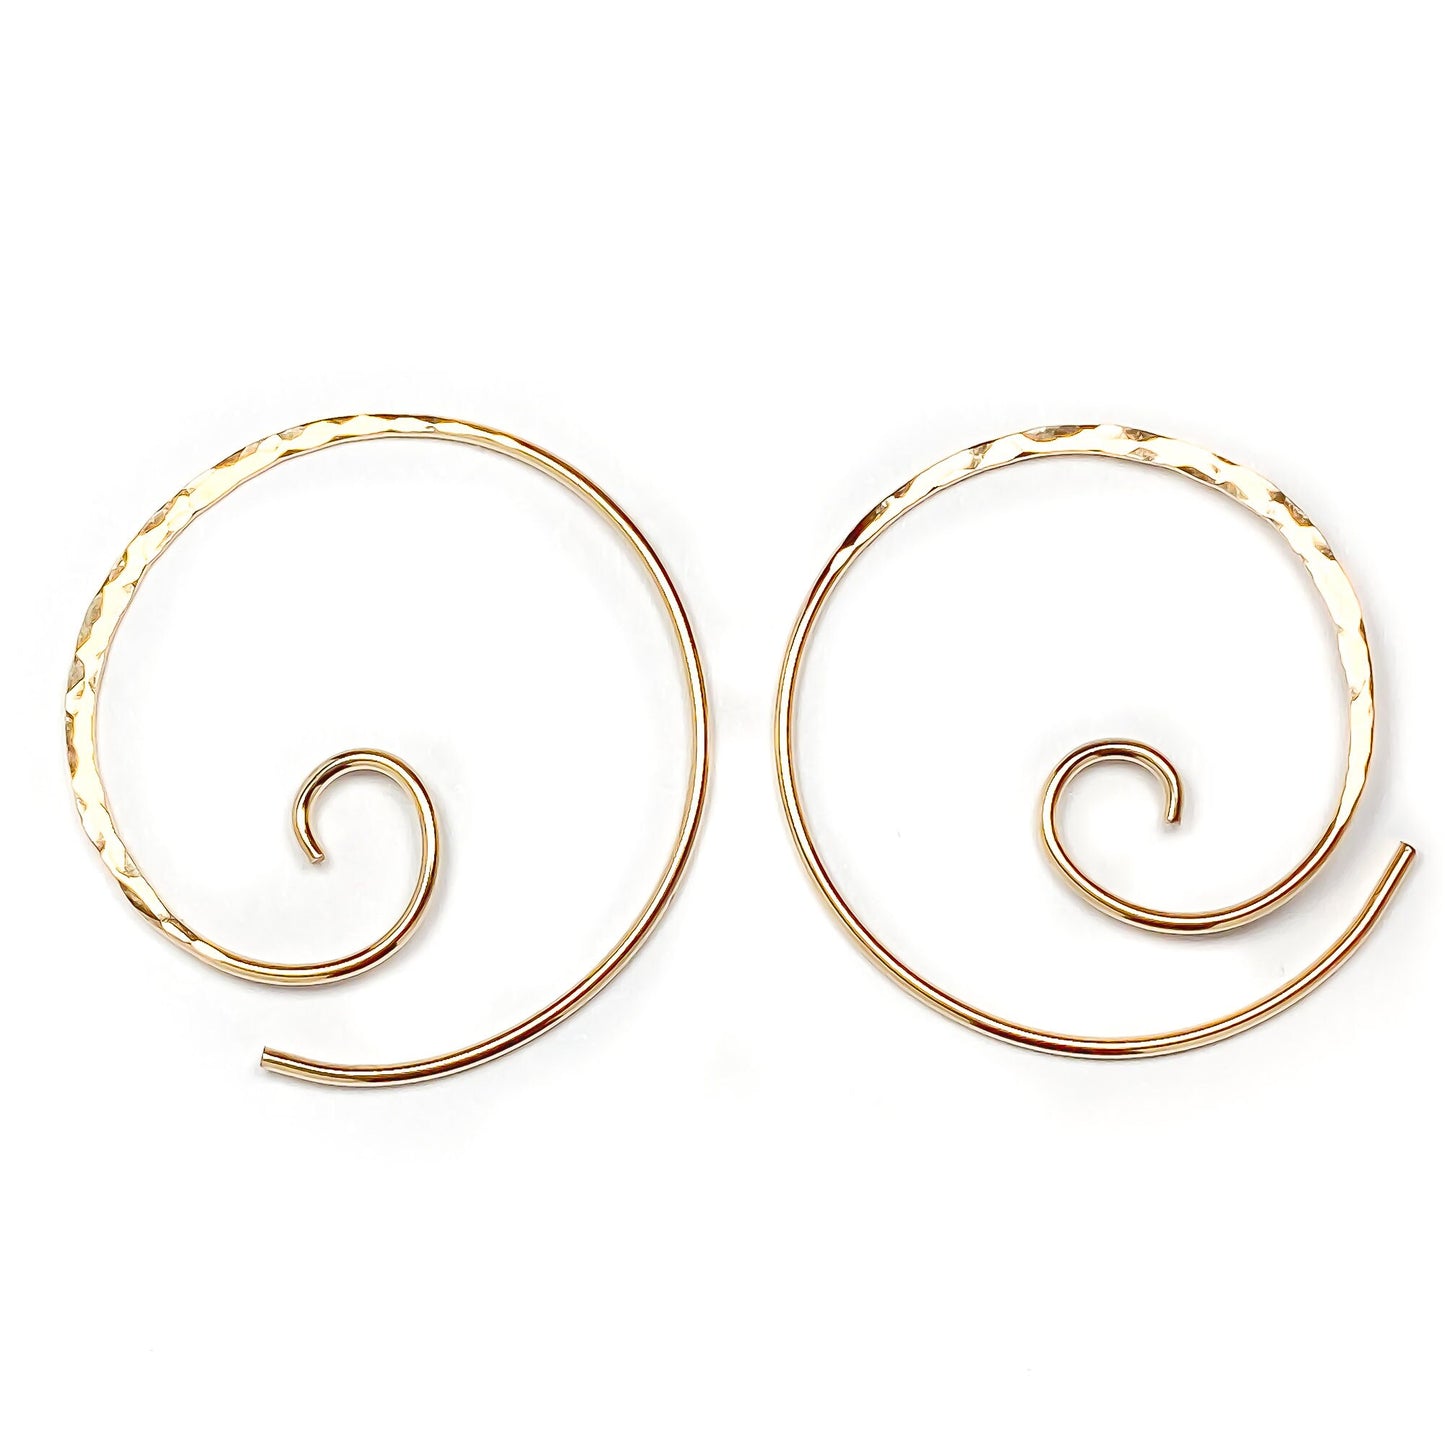 Thick Gold Filled Spiral Earrings